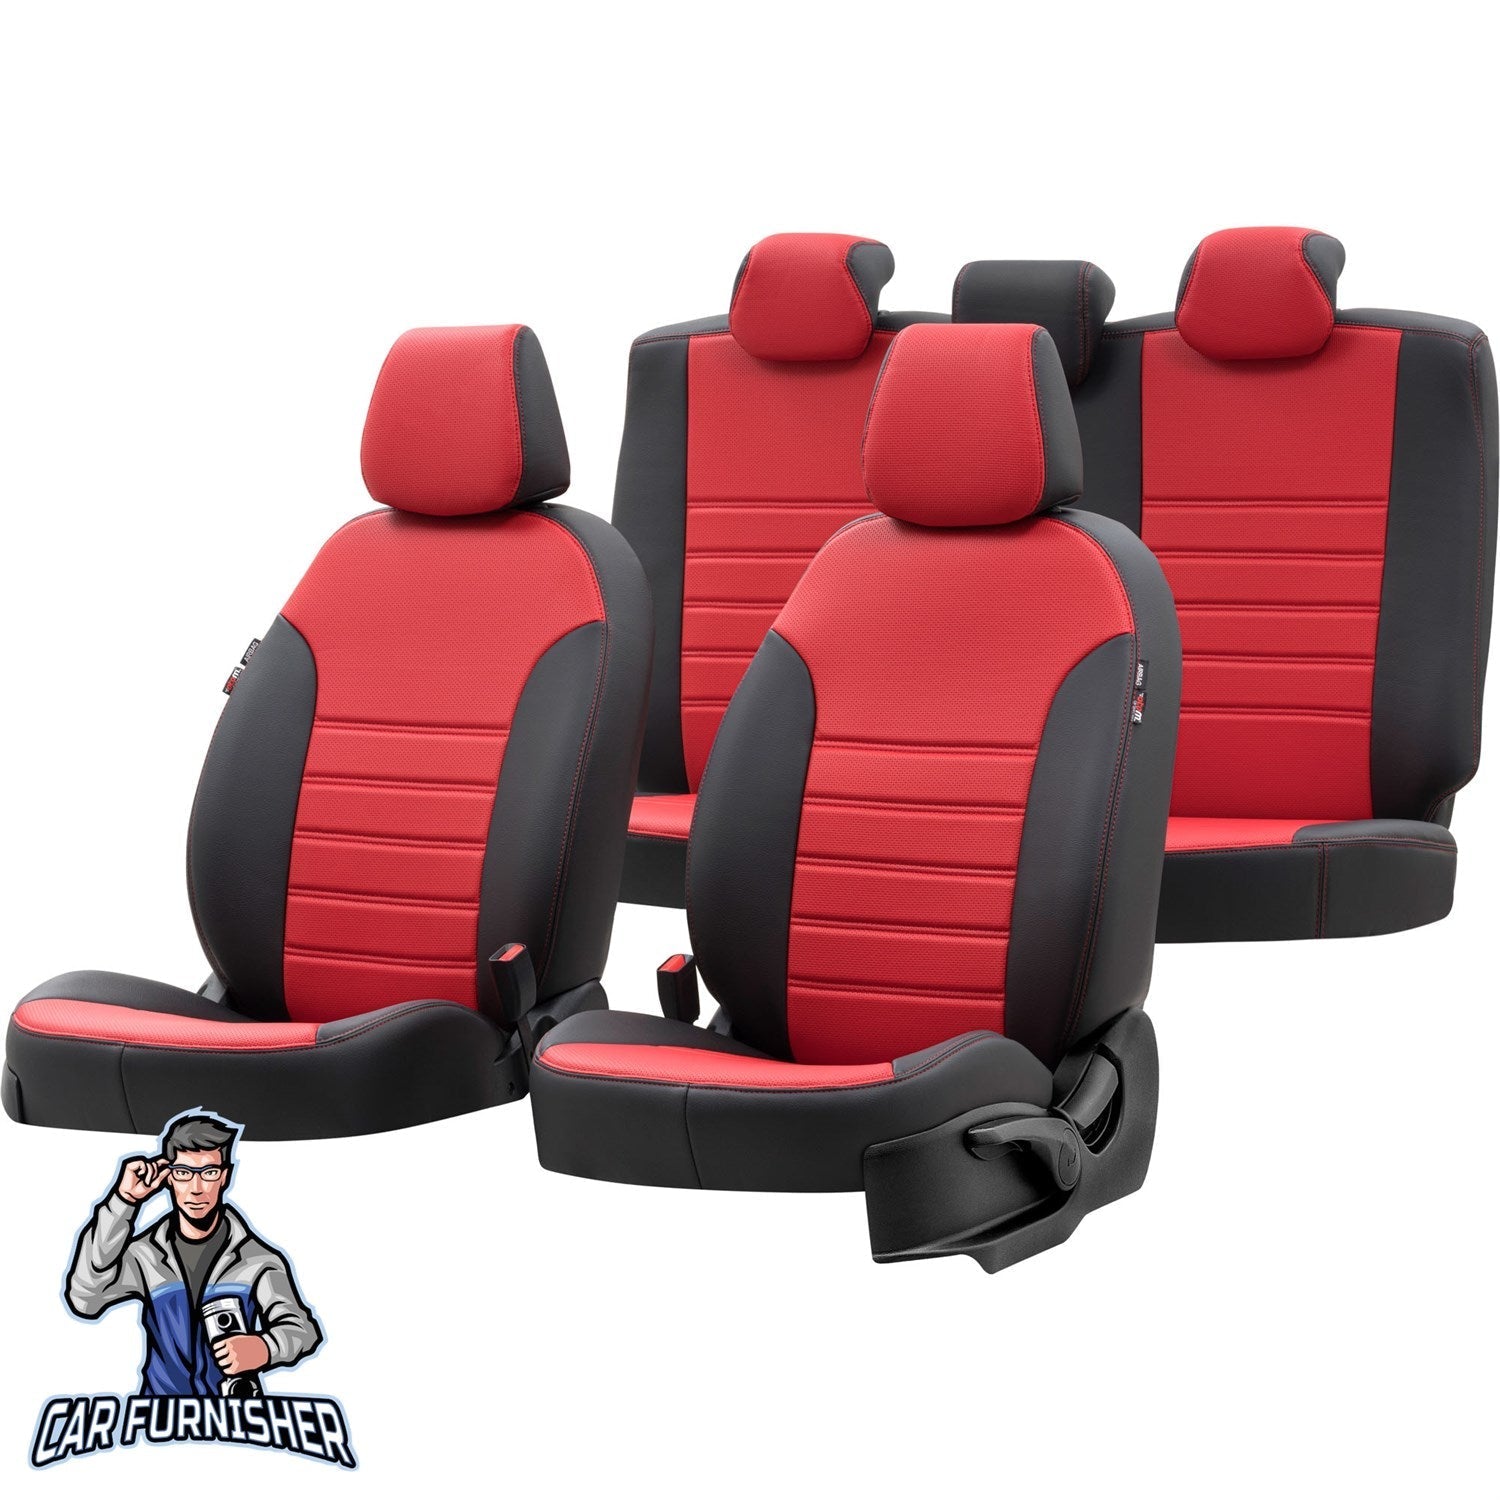 Dacia Lodgy Seat Covers New York Leather Design Red Leather